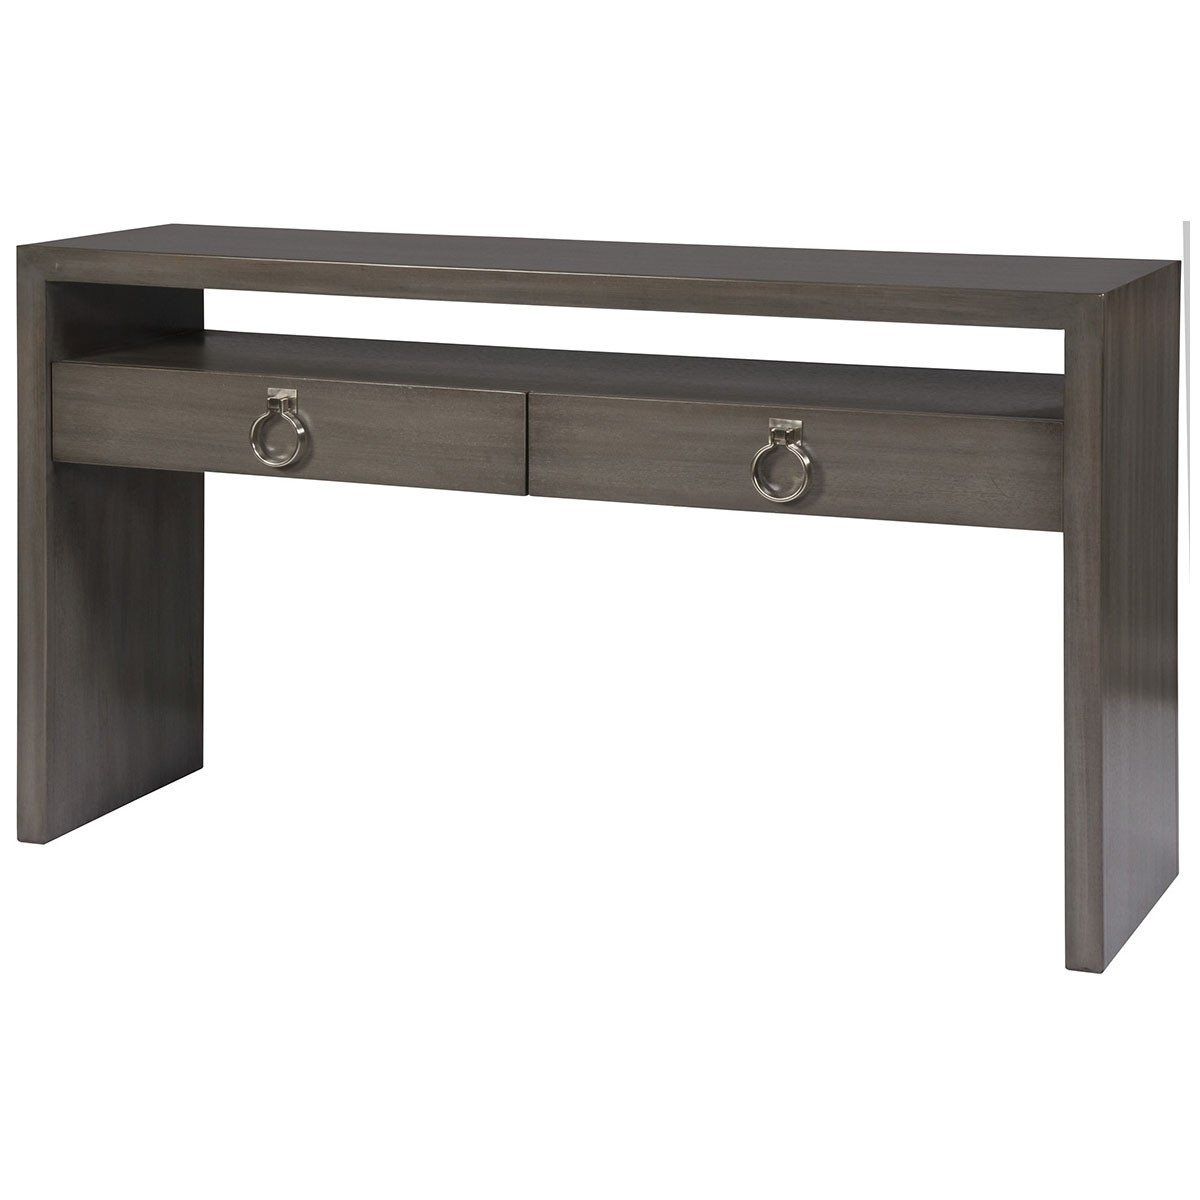 Vanguard Furniture Margo Console | Products | Furniture, Console Pertaining To Parsons Concrete Top & Brass Base 48x16 Console Tables (View 8 of 20)